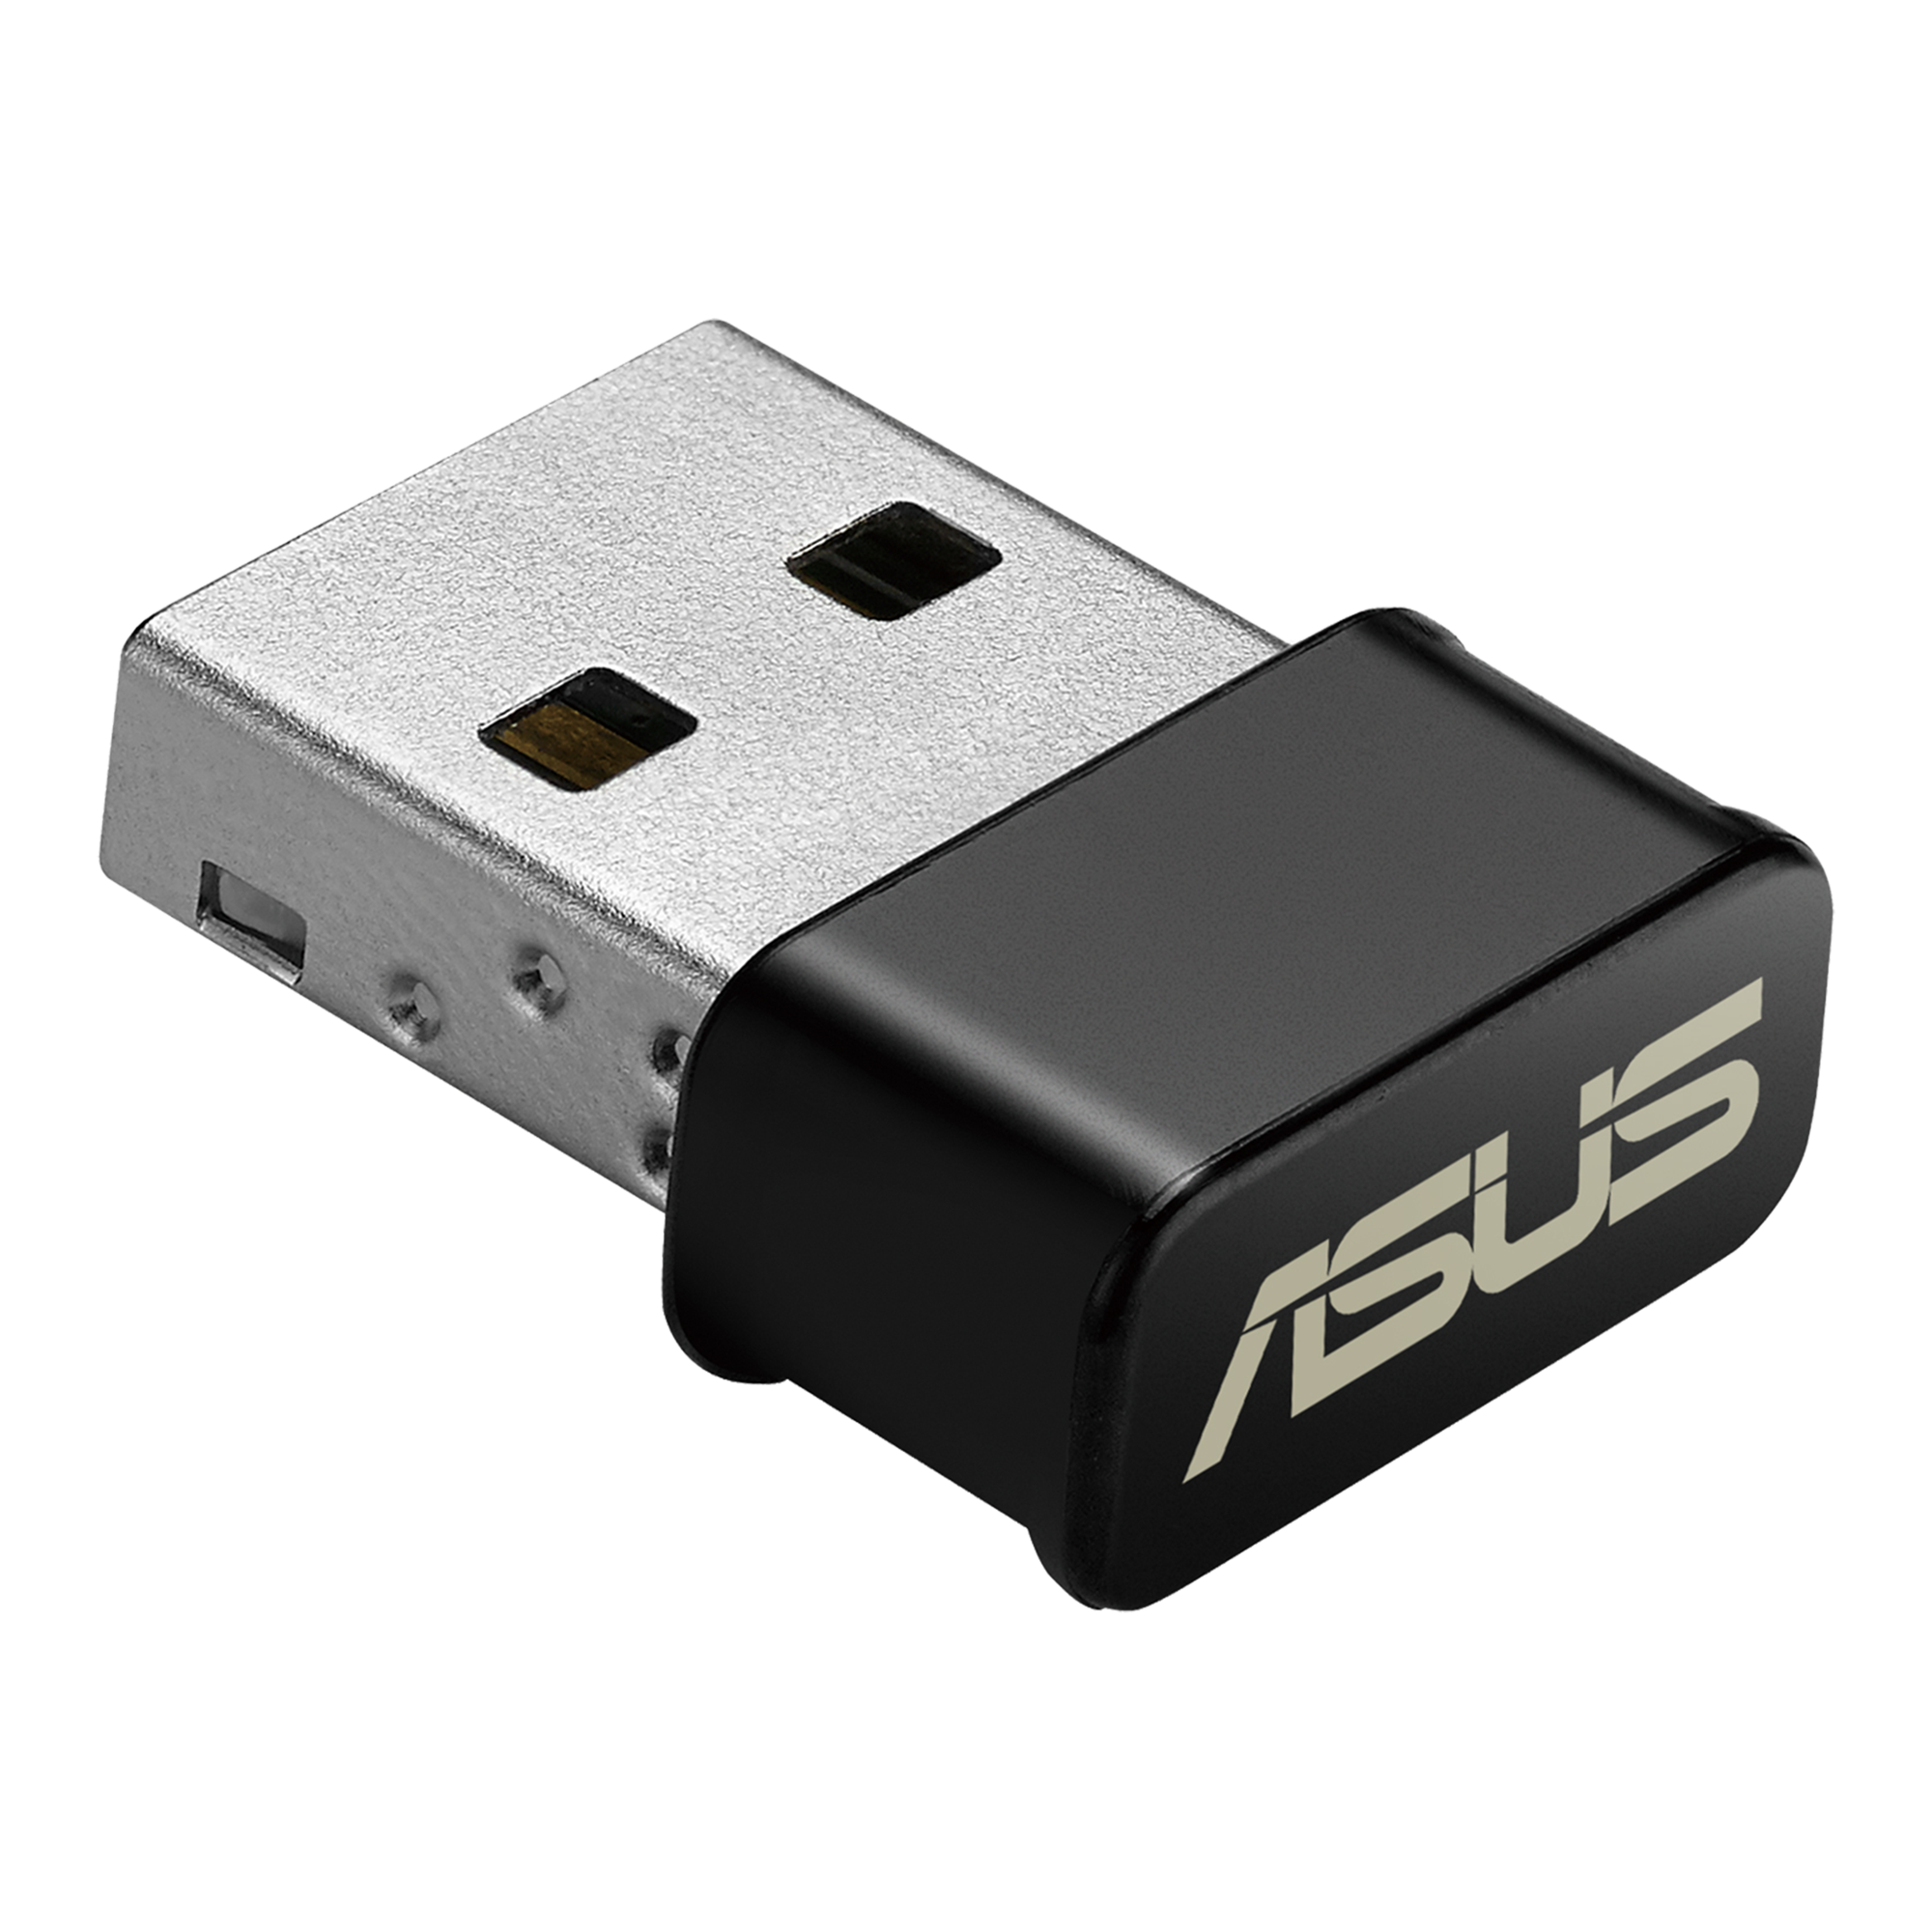 targus usb bluetooth 4.0 adapter driver download